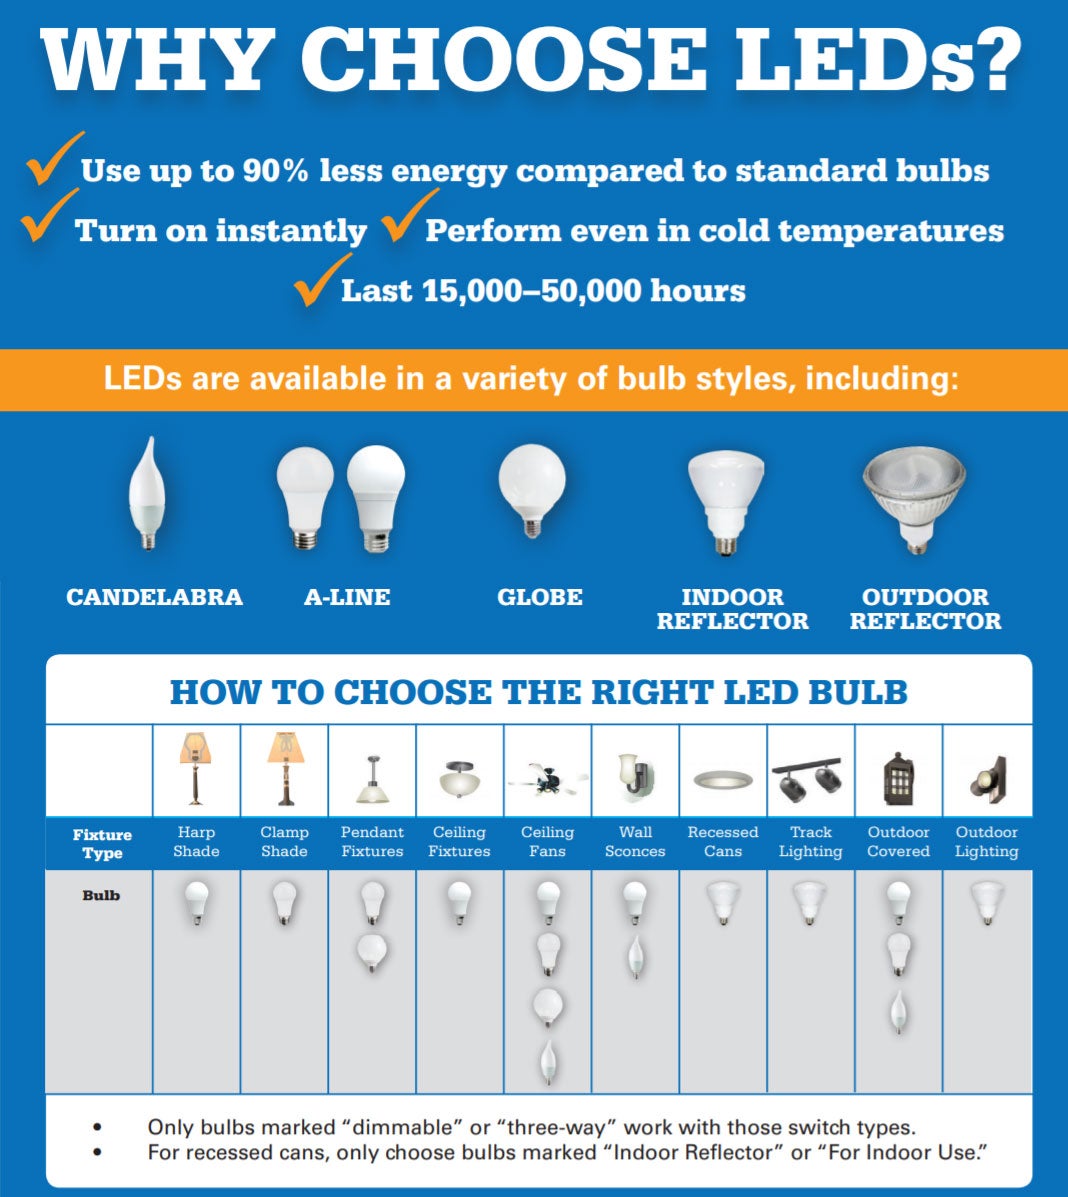 Why Choose LED Bulbs and How to Choose